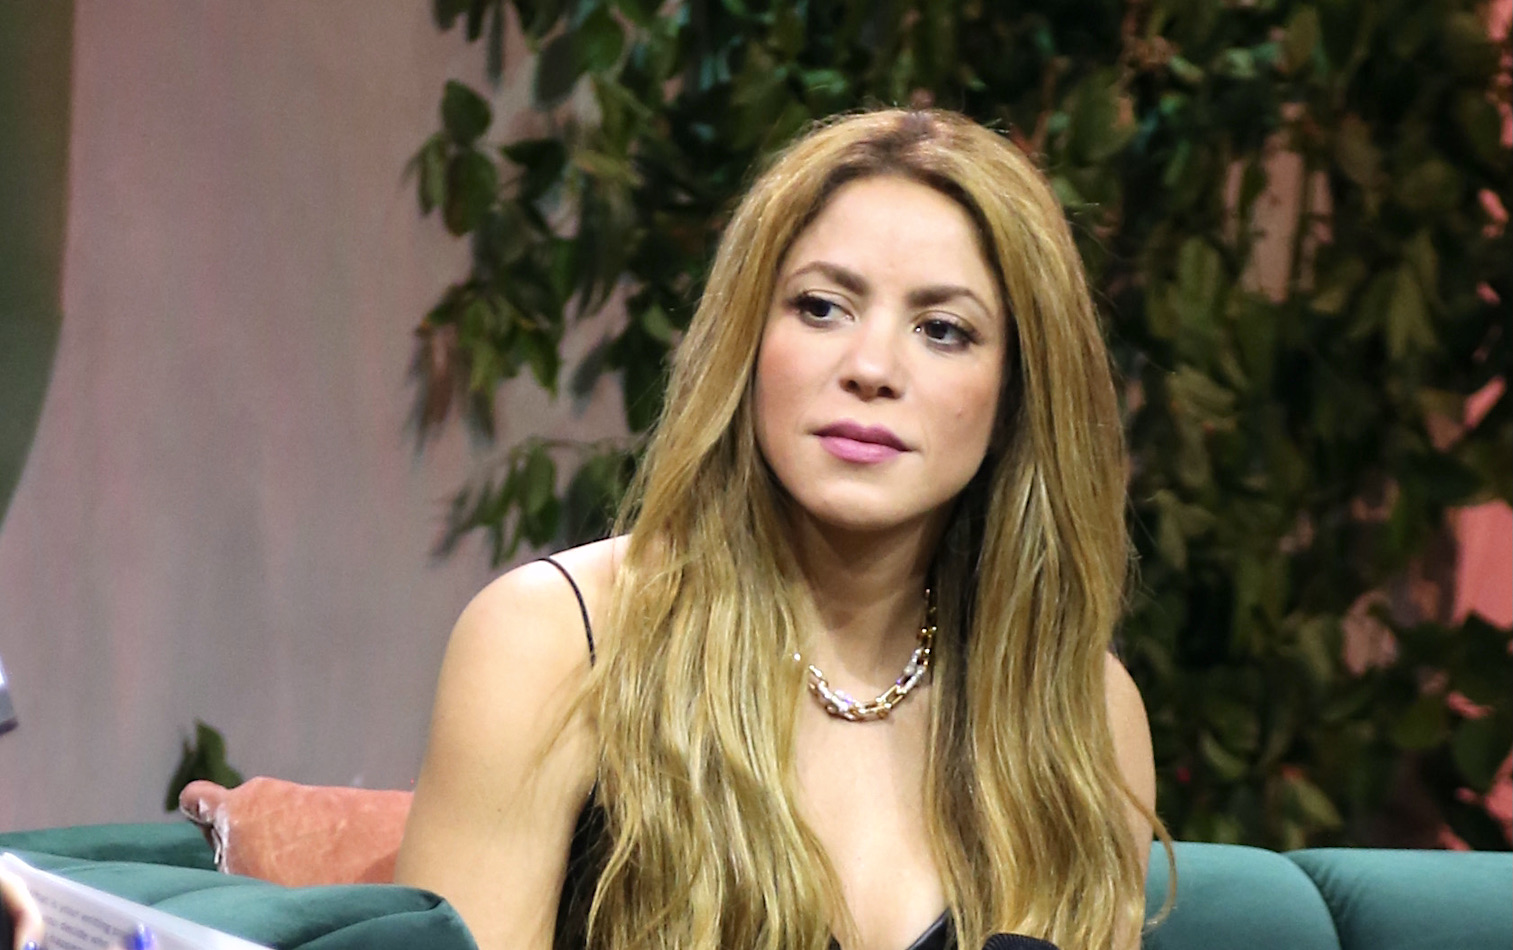 shakira's-private-security-would-be-causing-problems-at-her-children's-school